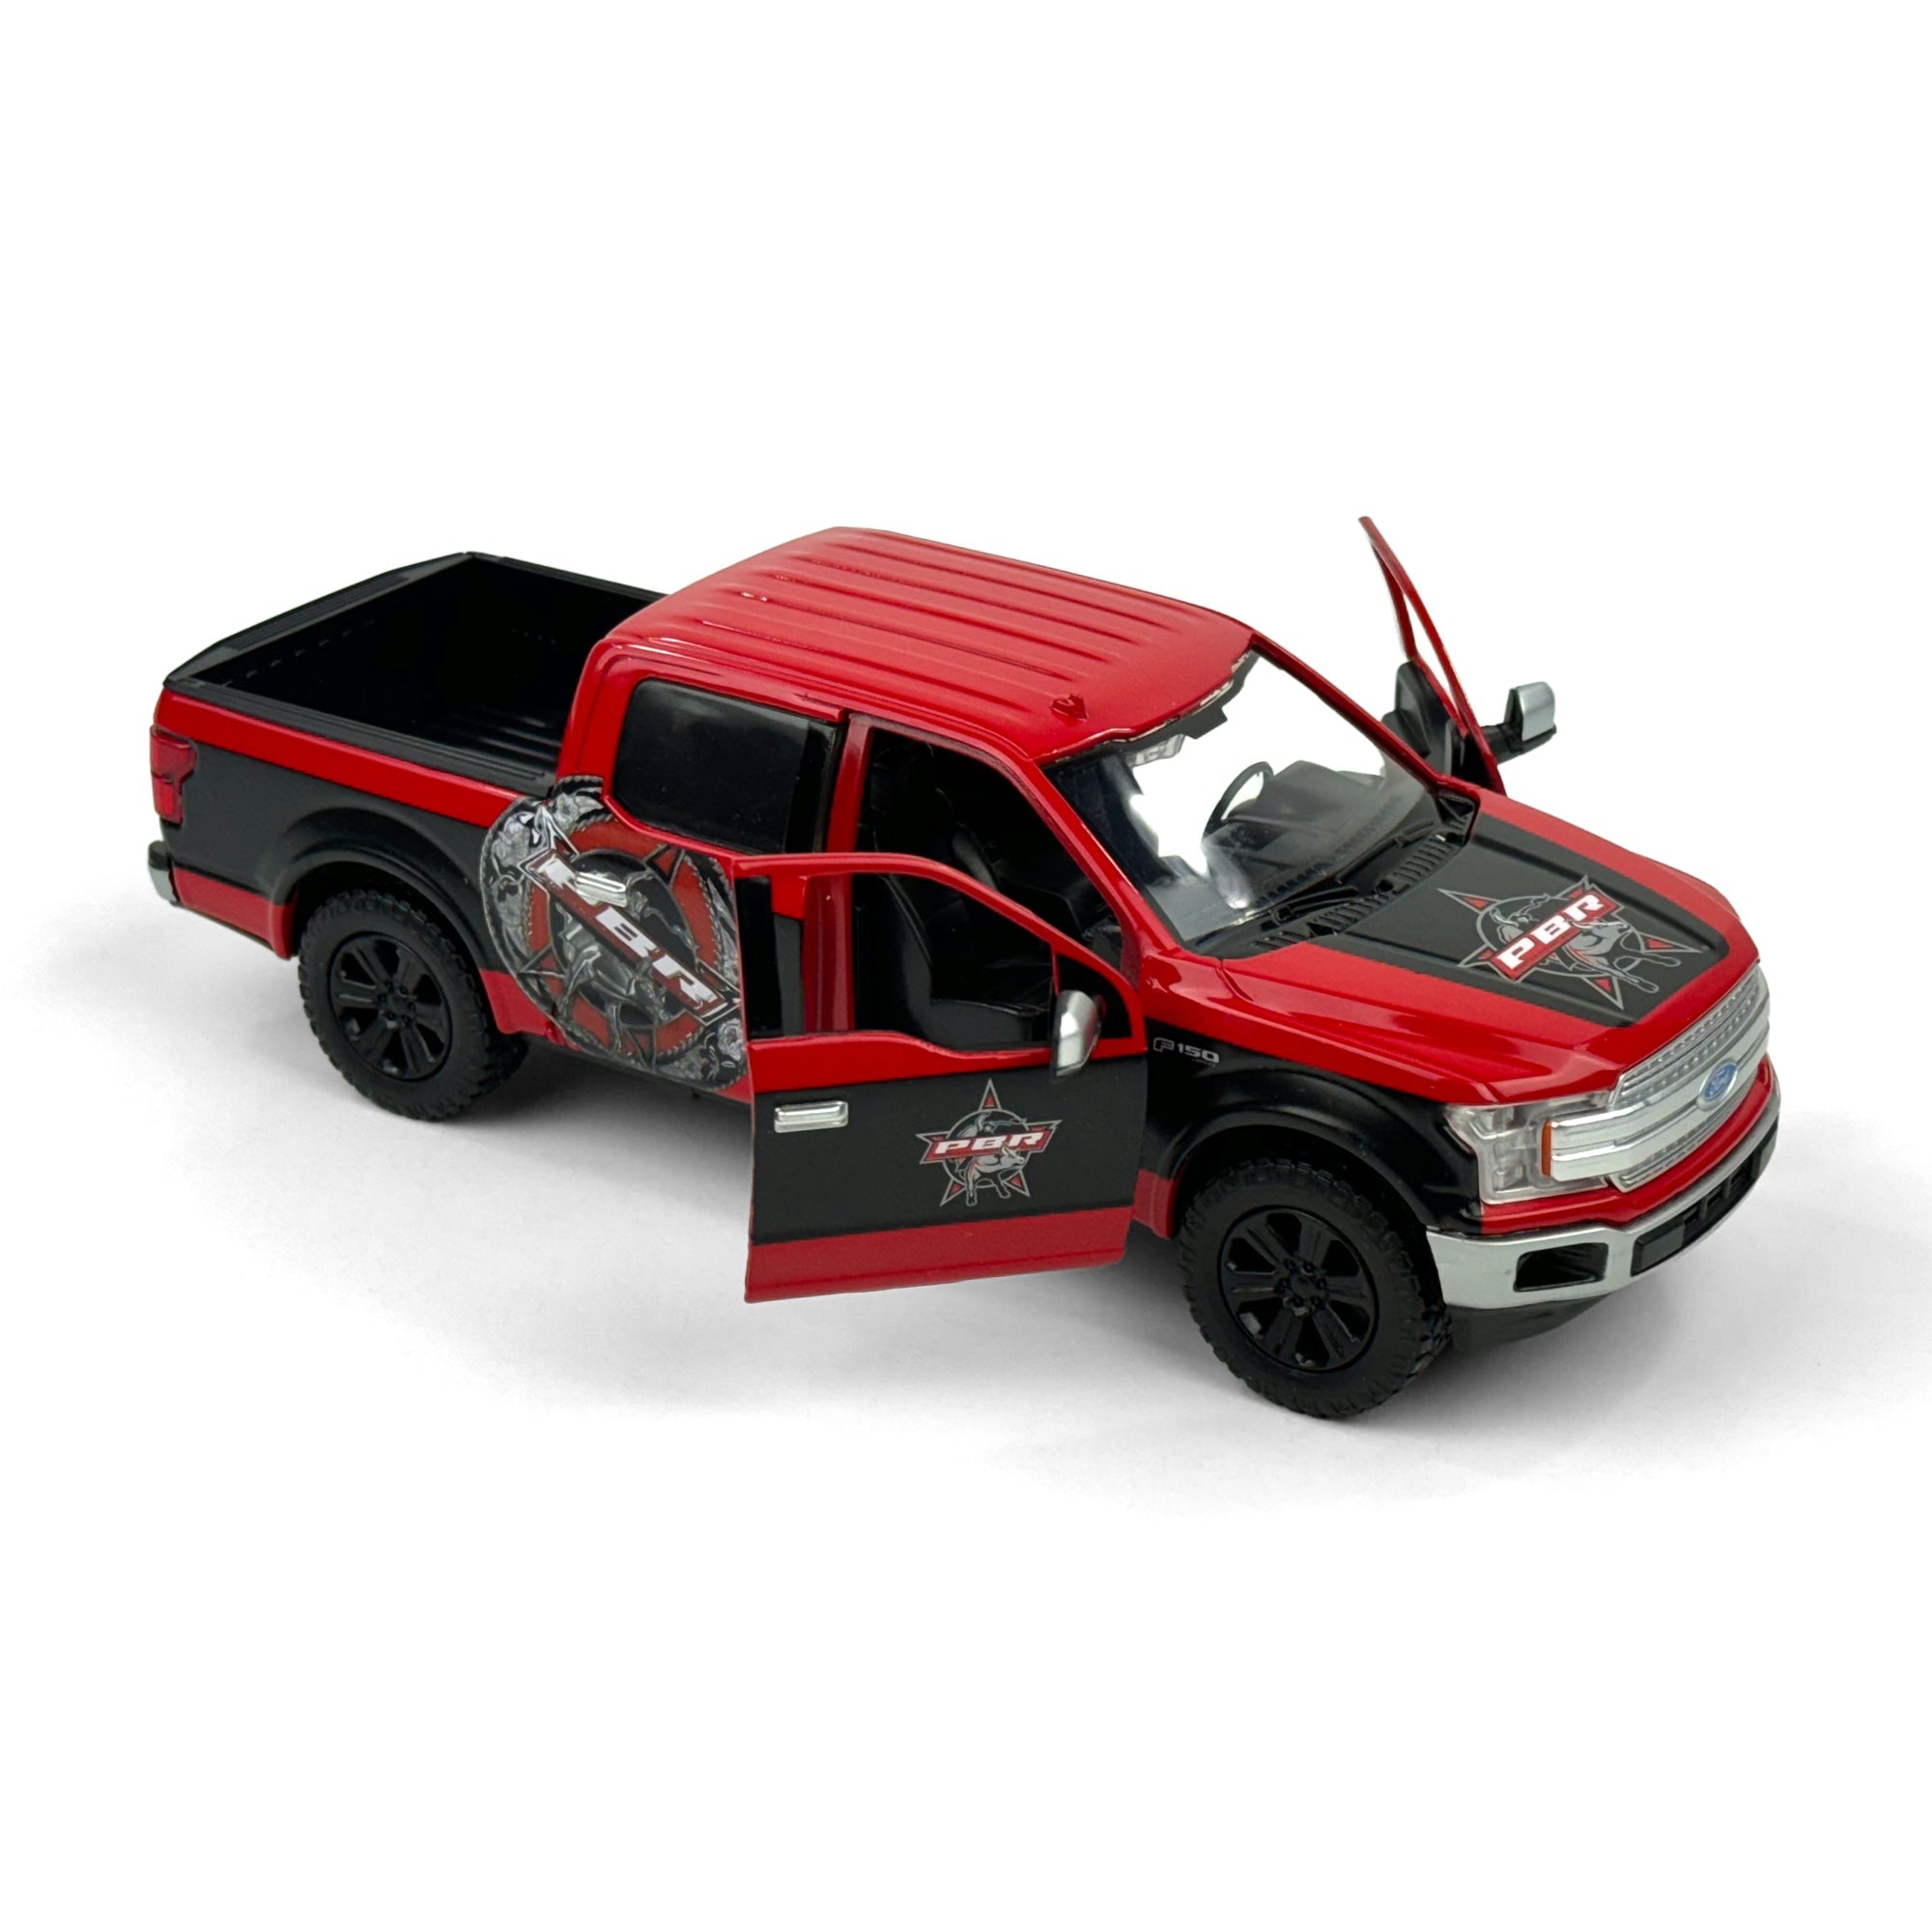 1:27 Scale Die-Cast – PBR® 2019 Ford F-150 Lariat